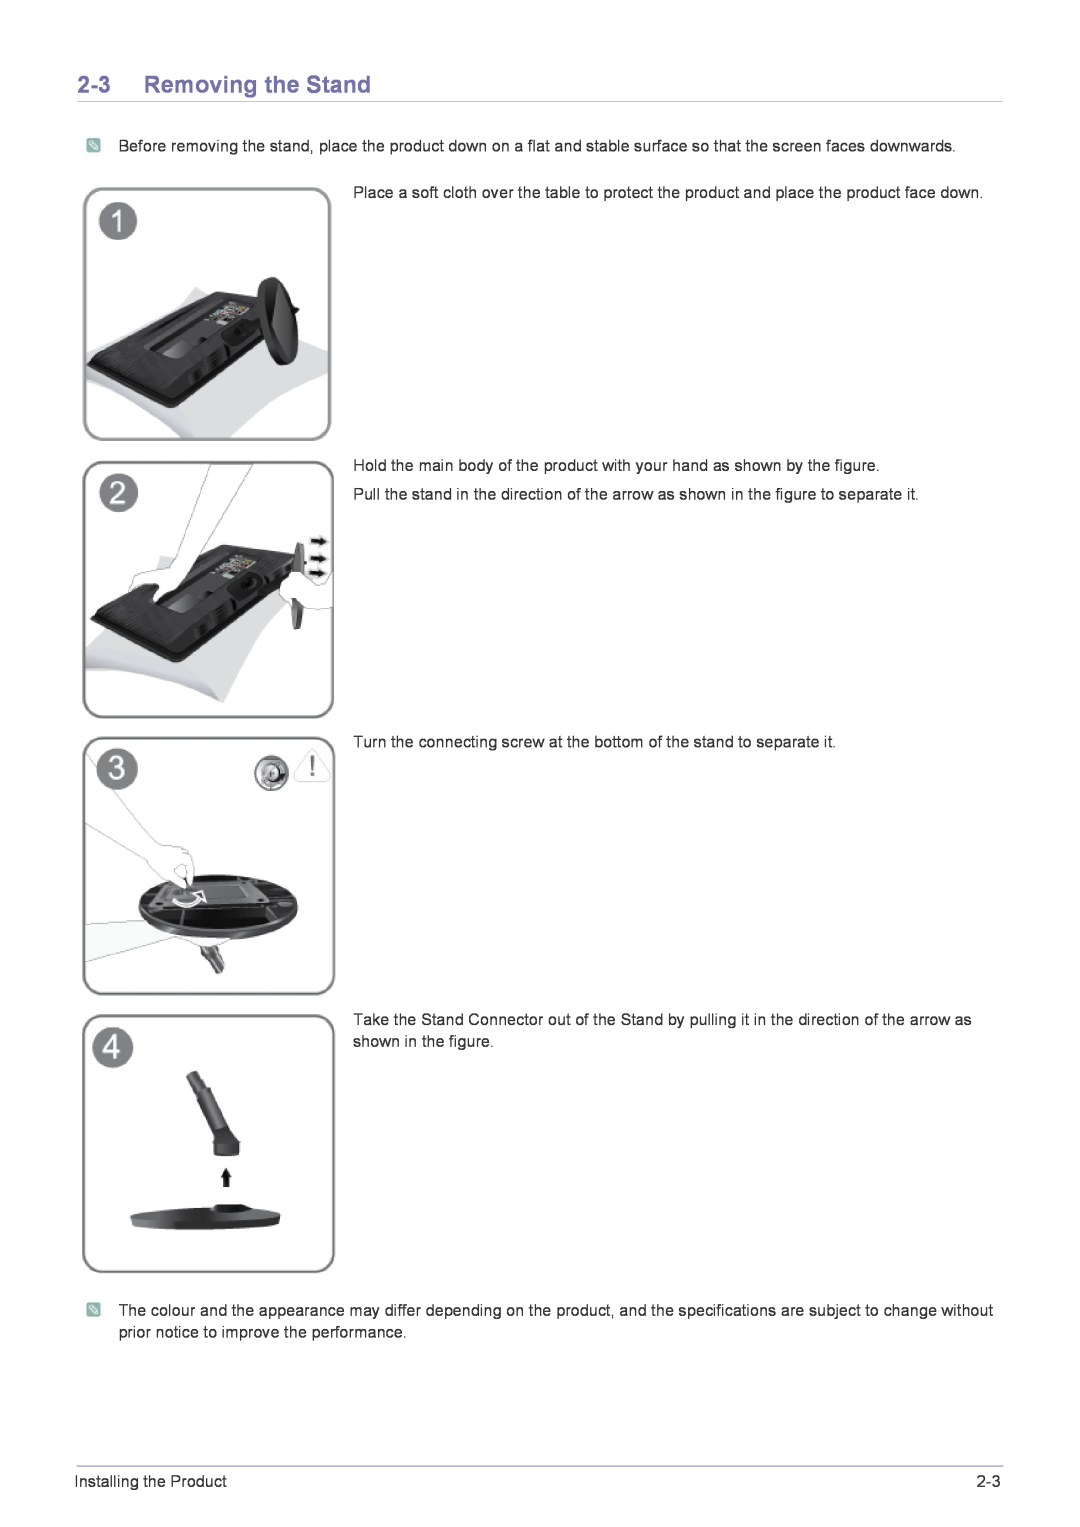 Samsung B2430HD, B2330HD, B1930HD, B2230HD, B2030HD user manual Removing the Stand 